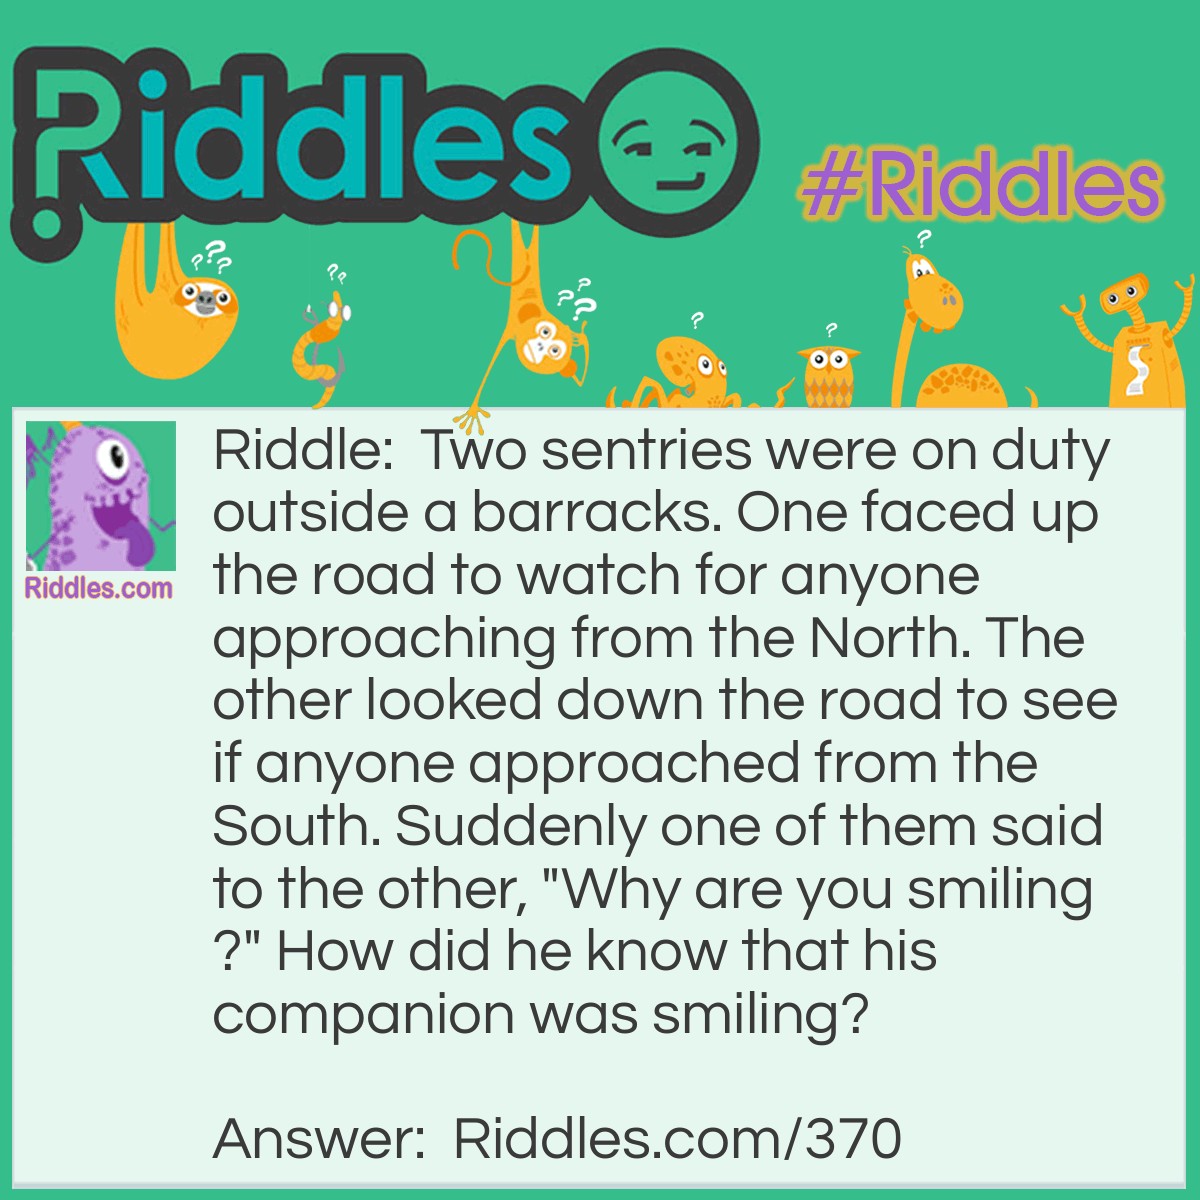 Riddle: Two sentries were on duty outside a barracks. One faced up the road to watch for anyone approaching from the North. The other looked down the road to see if anyone approached from the South. Suddenly one of them said to the other, "Why are you smiling?" How did he know that his companion was smiling? Answer: Although the guards were looking in opposite directions, they were not back to back. They were facing each other.